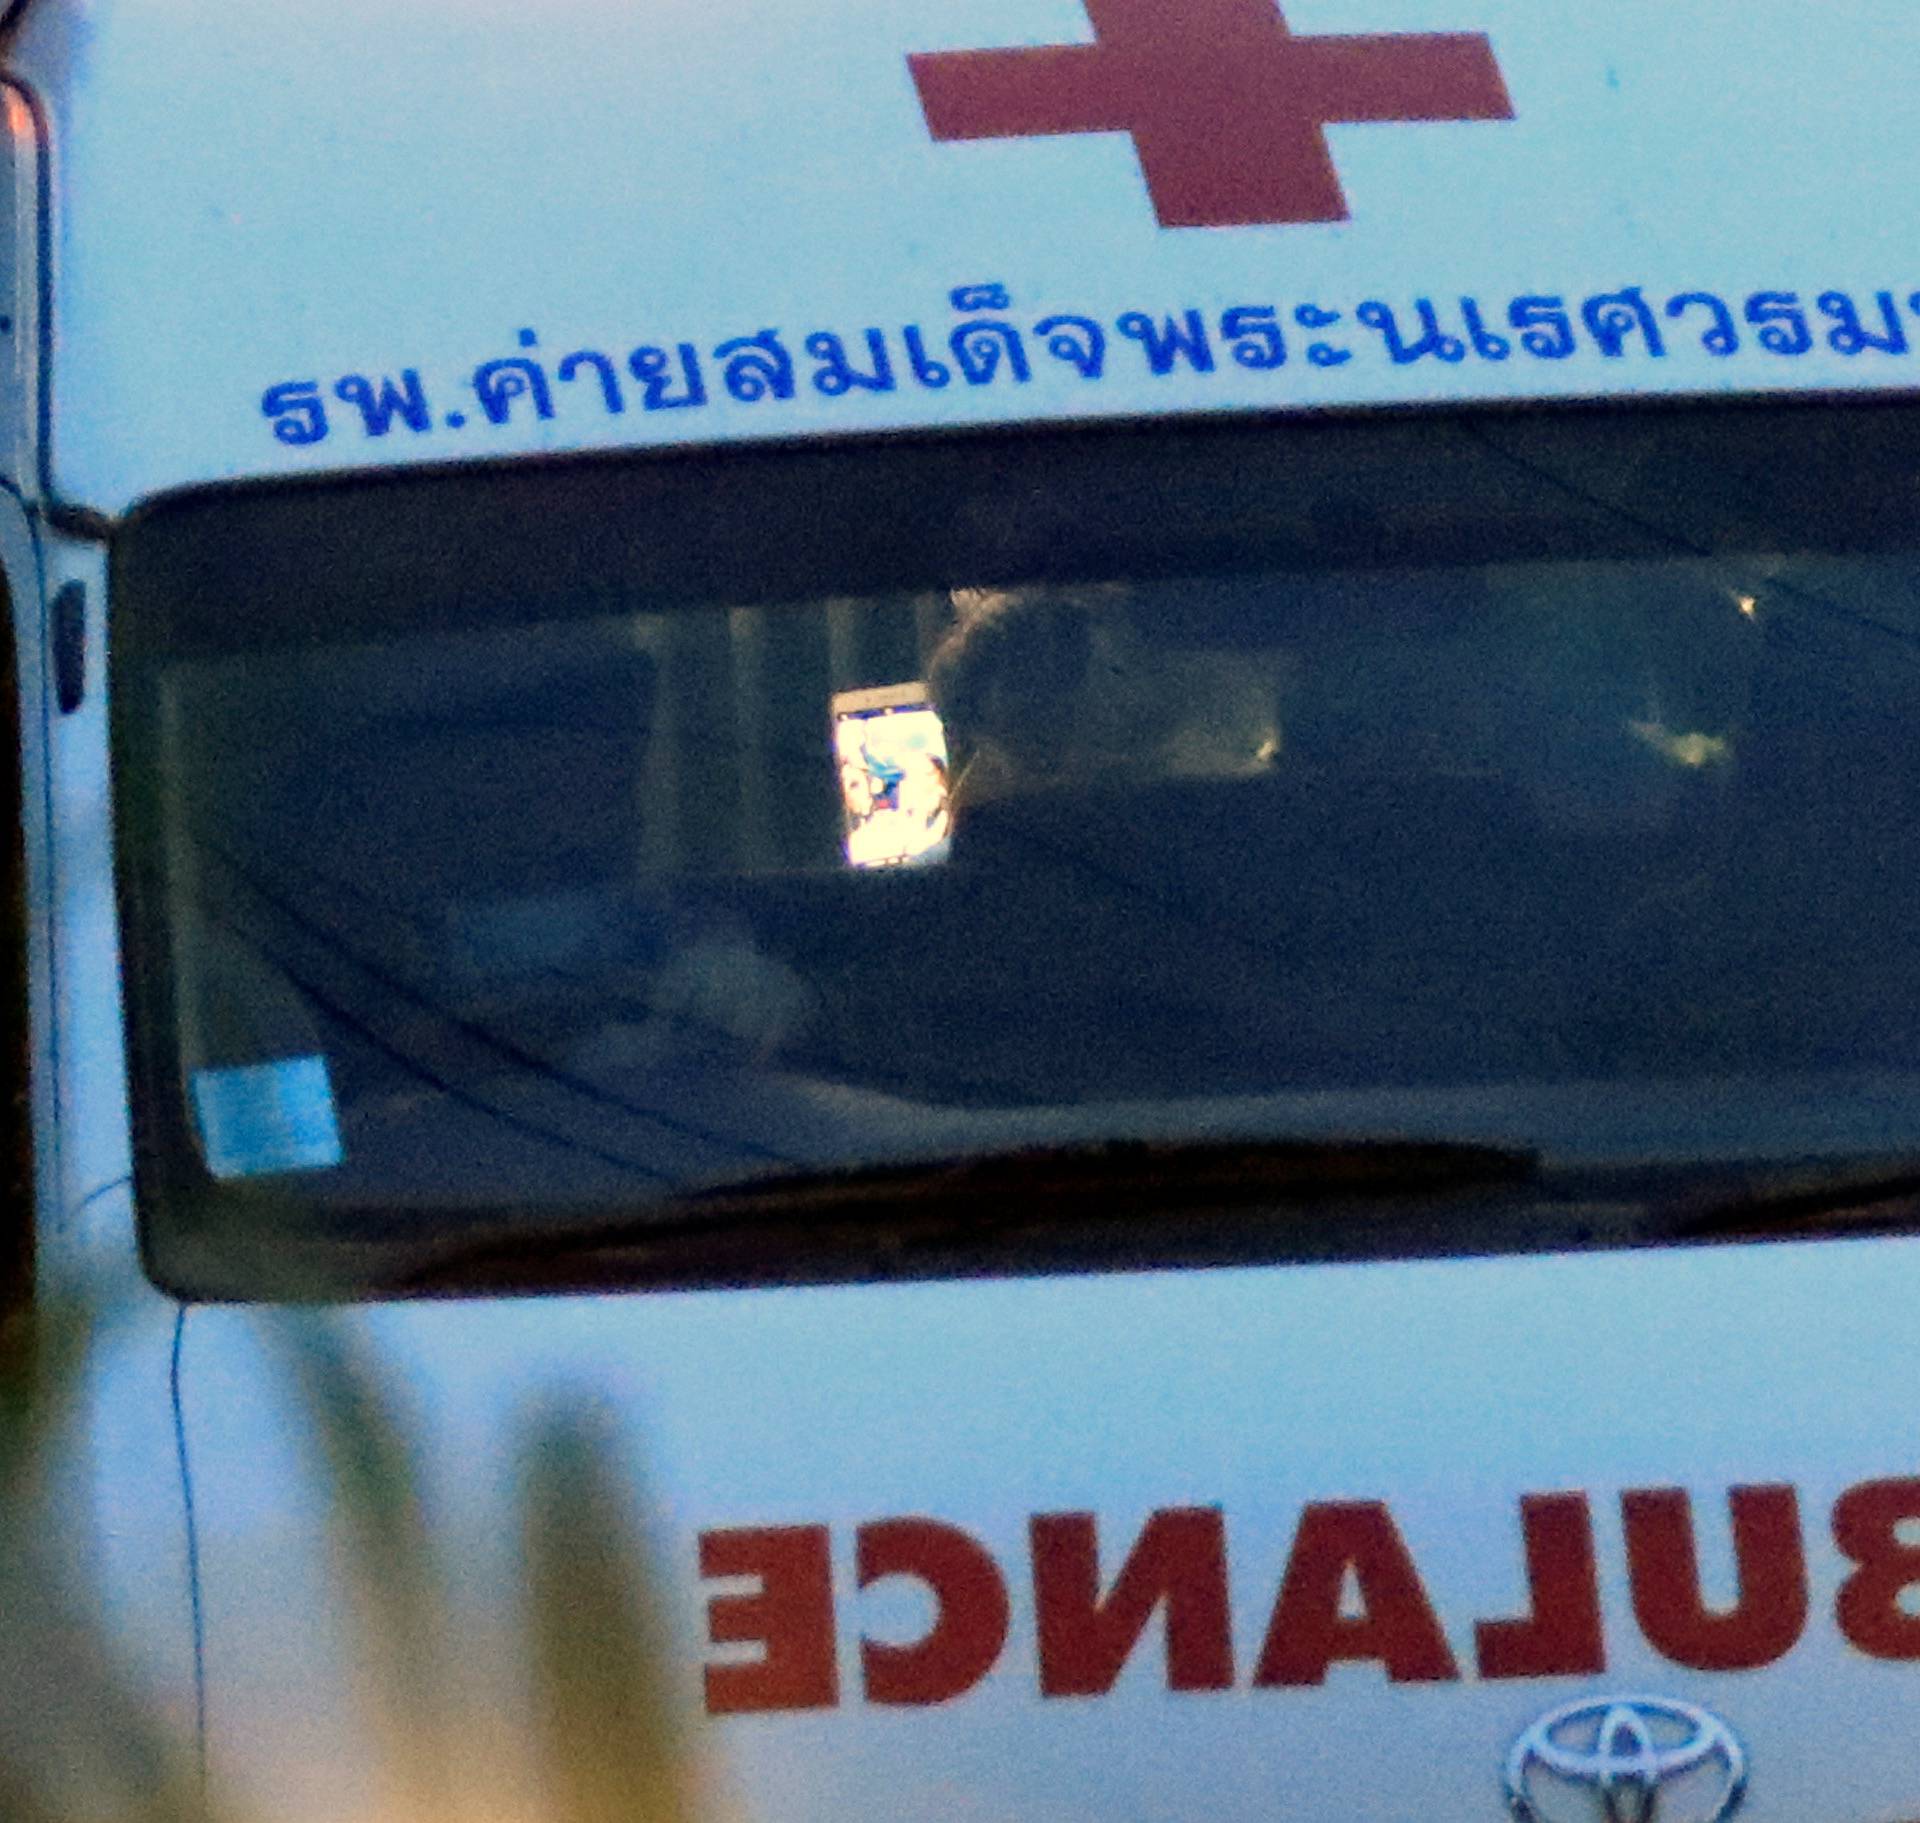 A person is seen using a mobile phone in an ambulance leaving from Tham Luang cave complex in the northern province of Chiang Rai